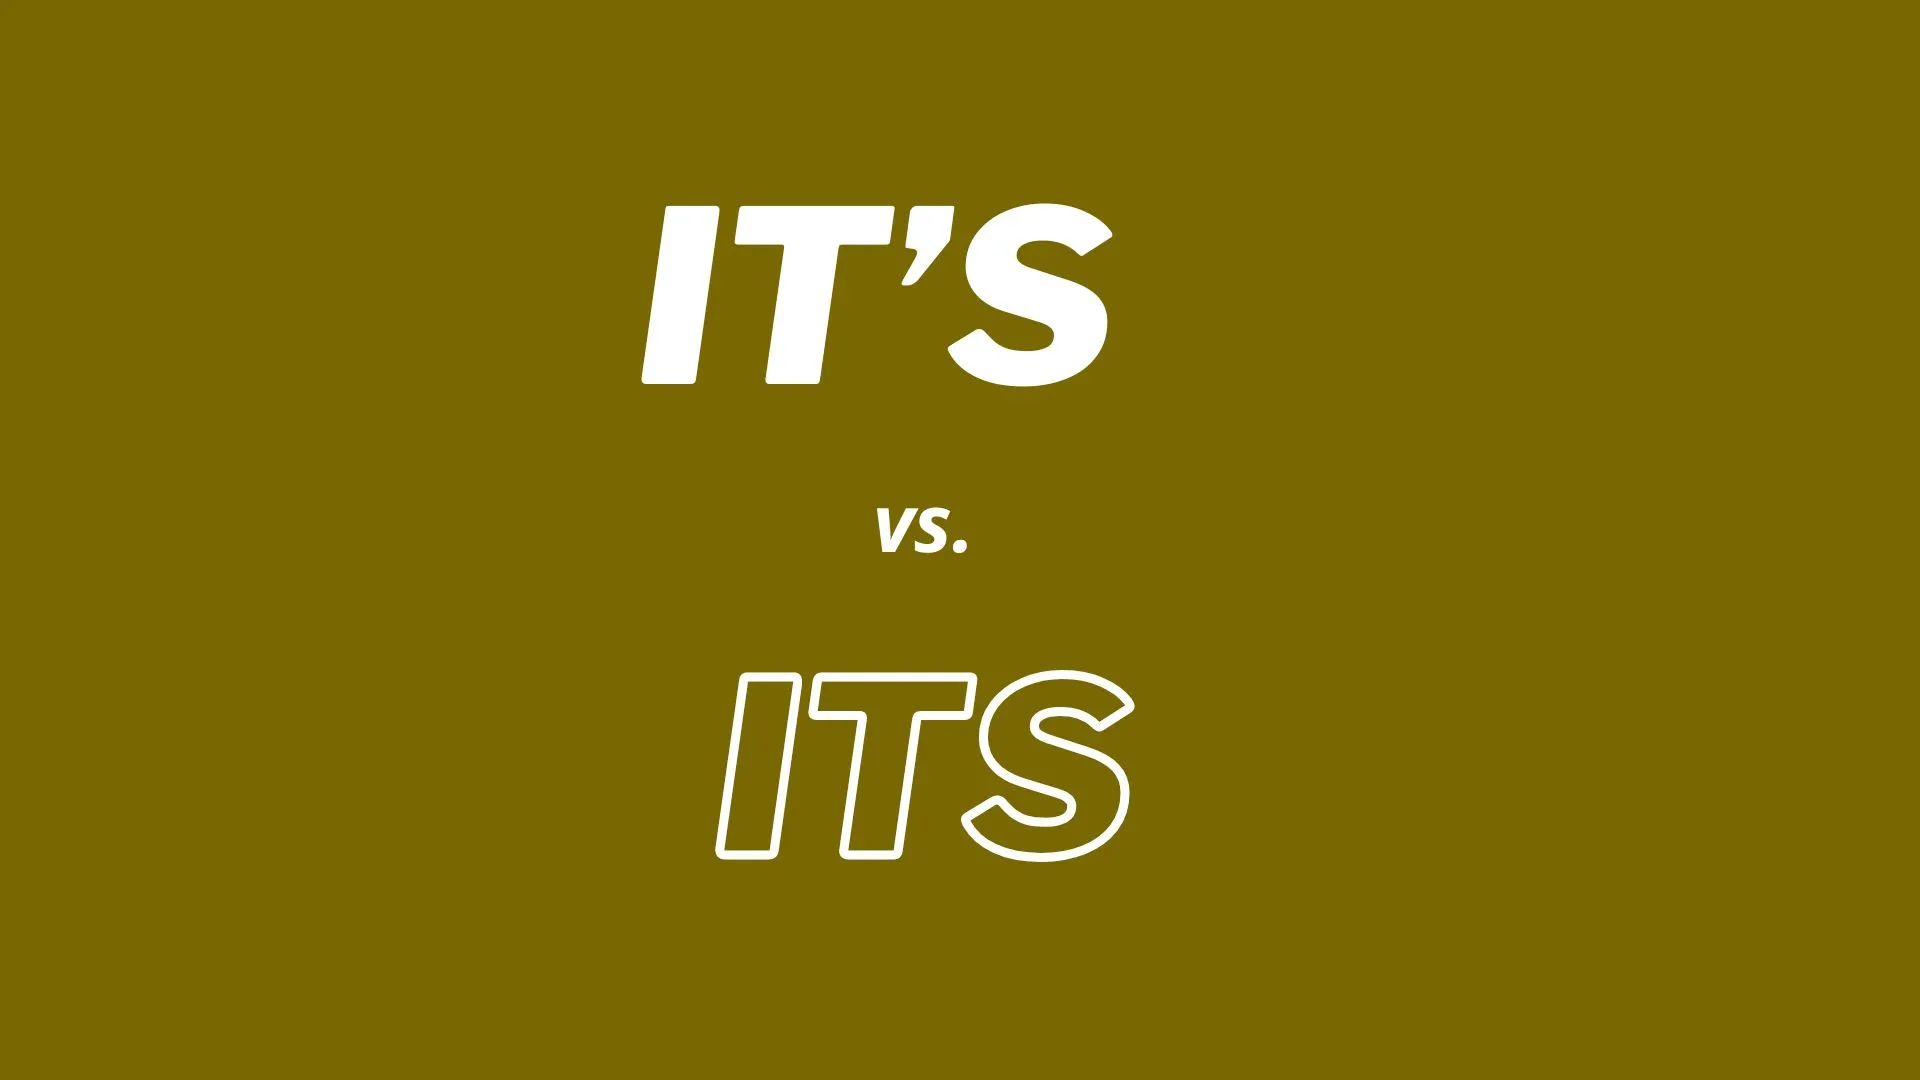 Visual comparison of the use of words "it's" and "its".